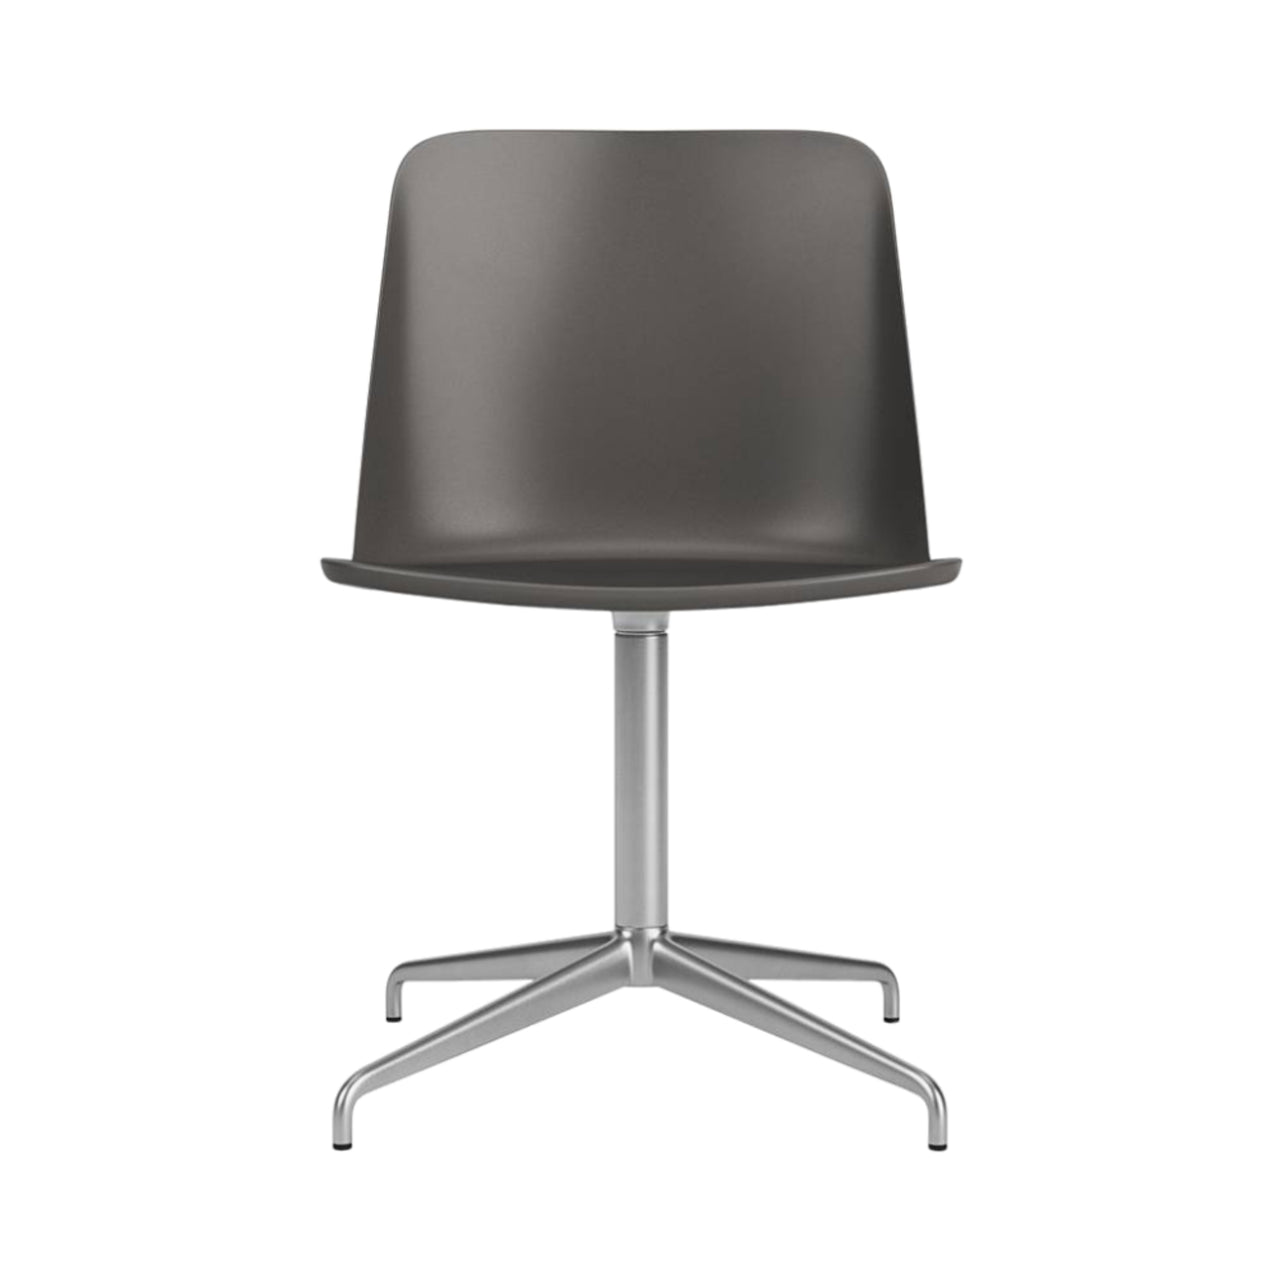 Rely Chair HW16: Stone Grey + Polished Aluminum